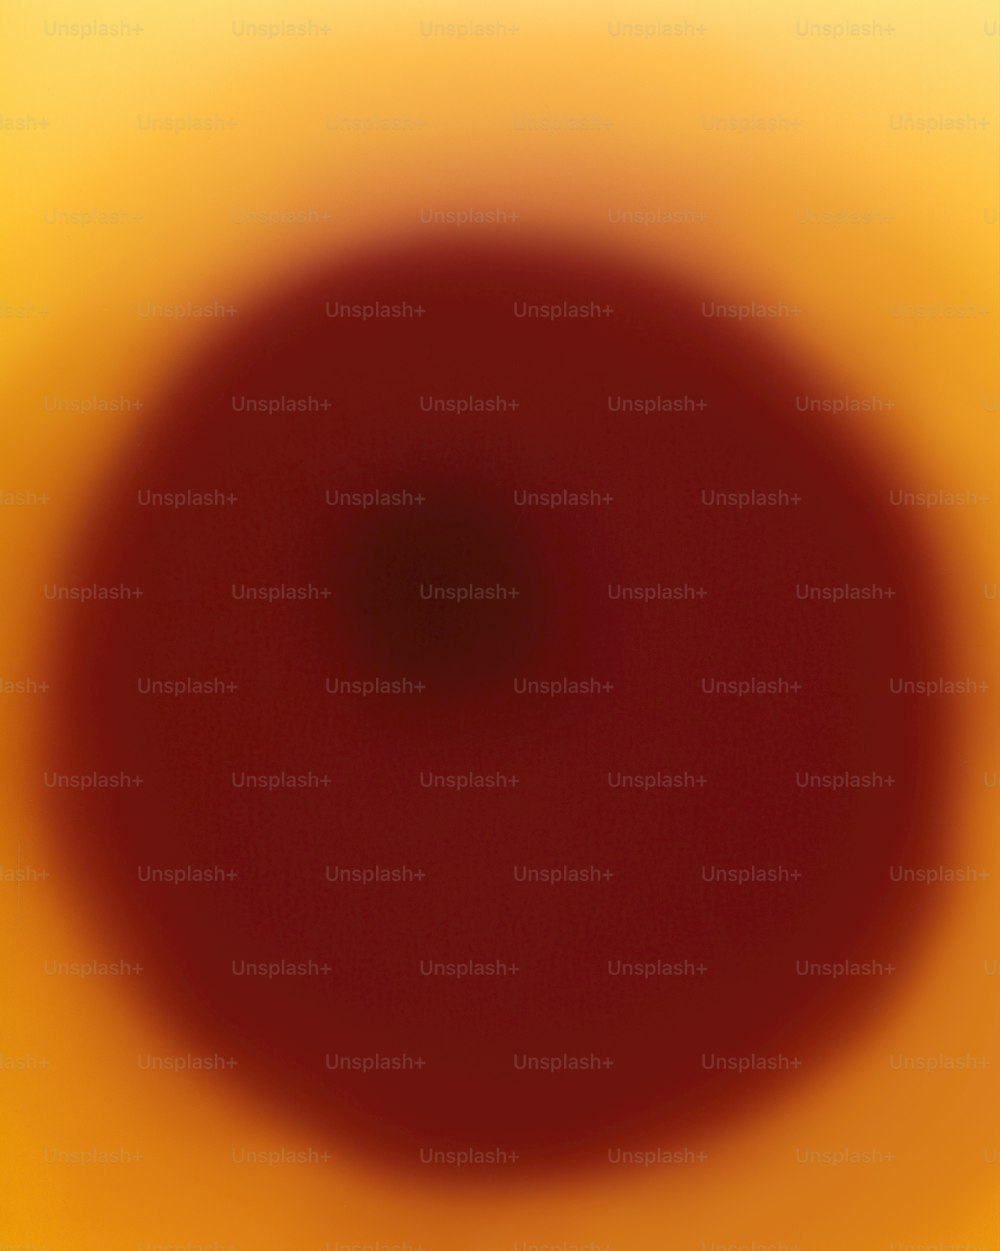 a blurry image of a red circle on a yellow background